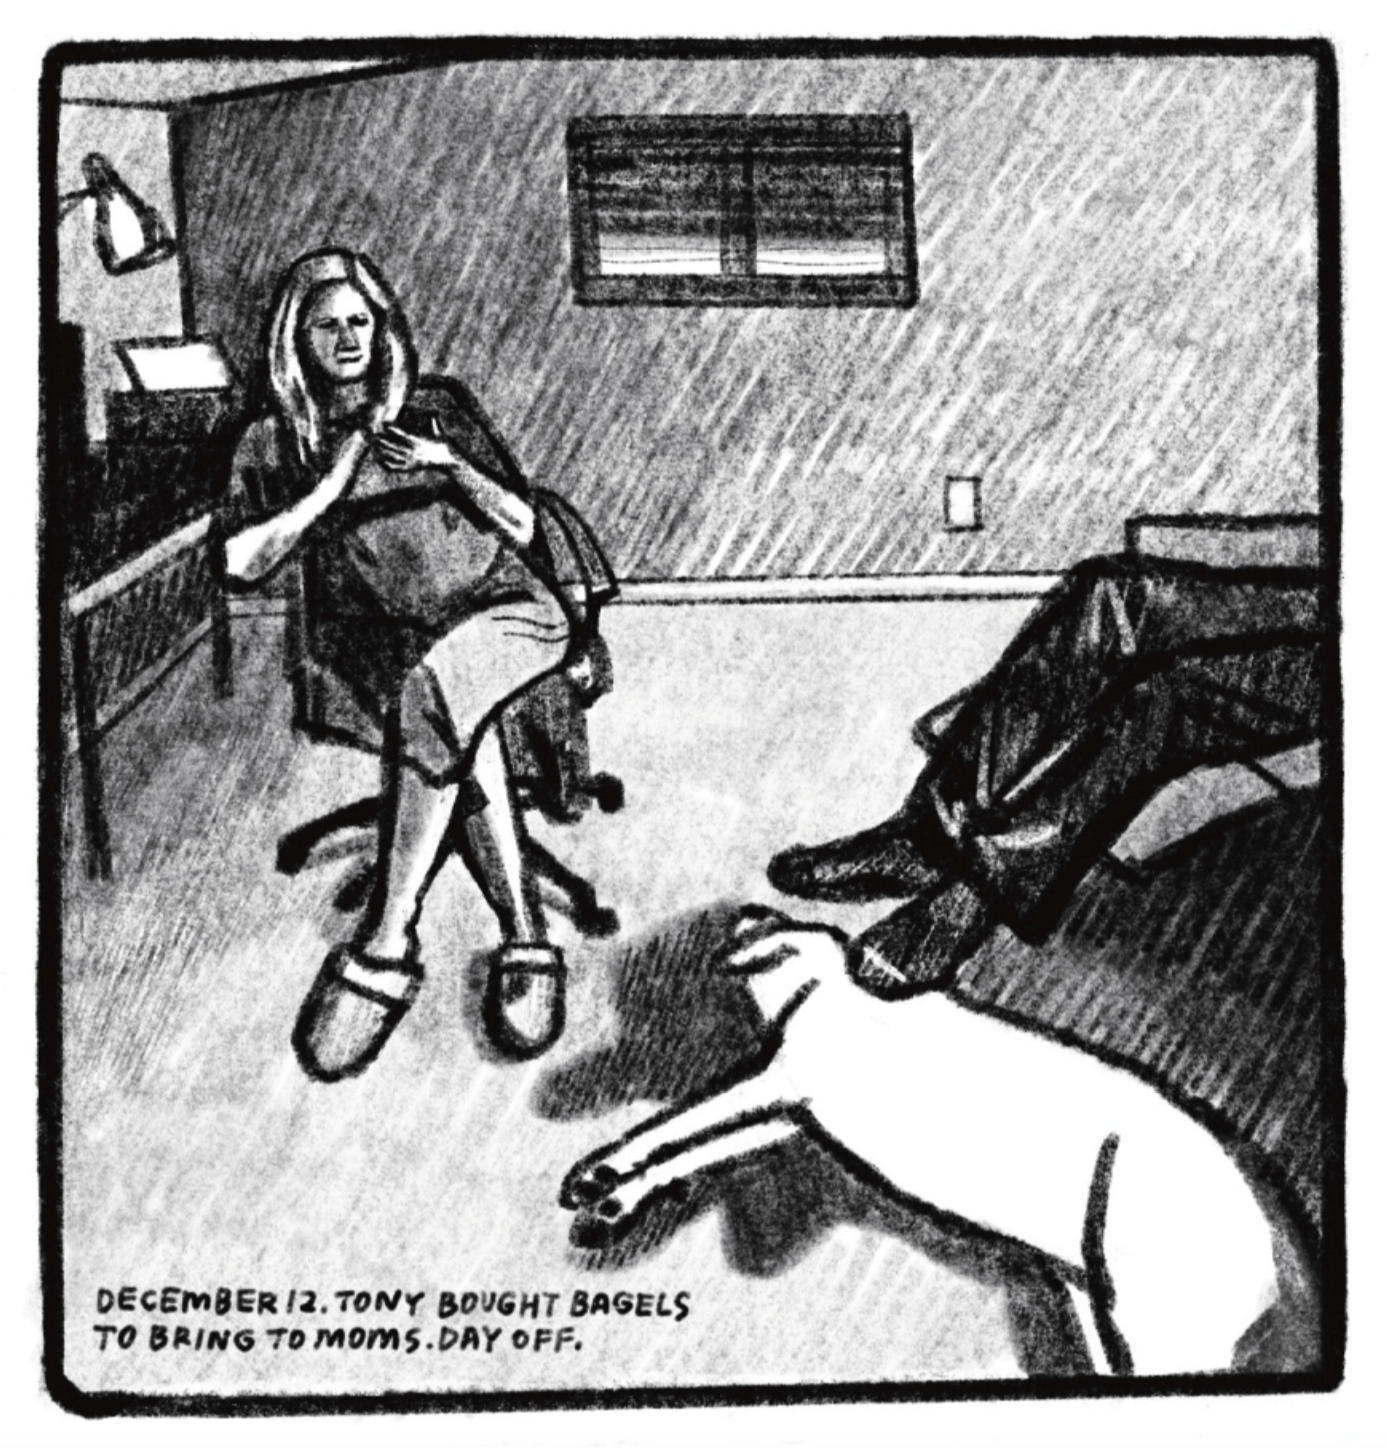 Kim is sitting one leg over the other in an office swivel chair, looking at her phone. Someoneâ€™s legs extend from the couch at the side of the panel, the rest of their body off-panel. One foot rests on Kimâ€™s dog lying on the ground. â€œDecember 12. Tony bought bagels to bring to momâ€™s. Day off.â€